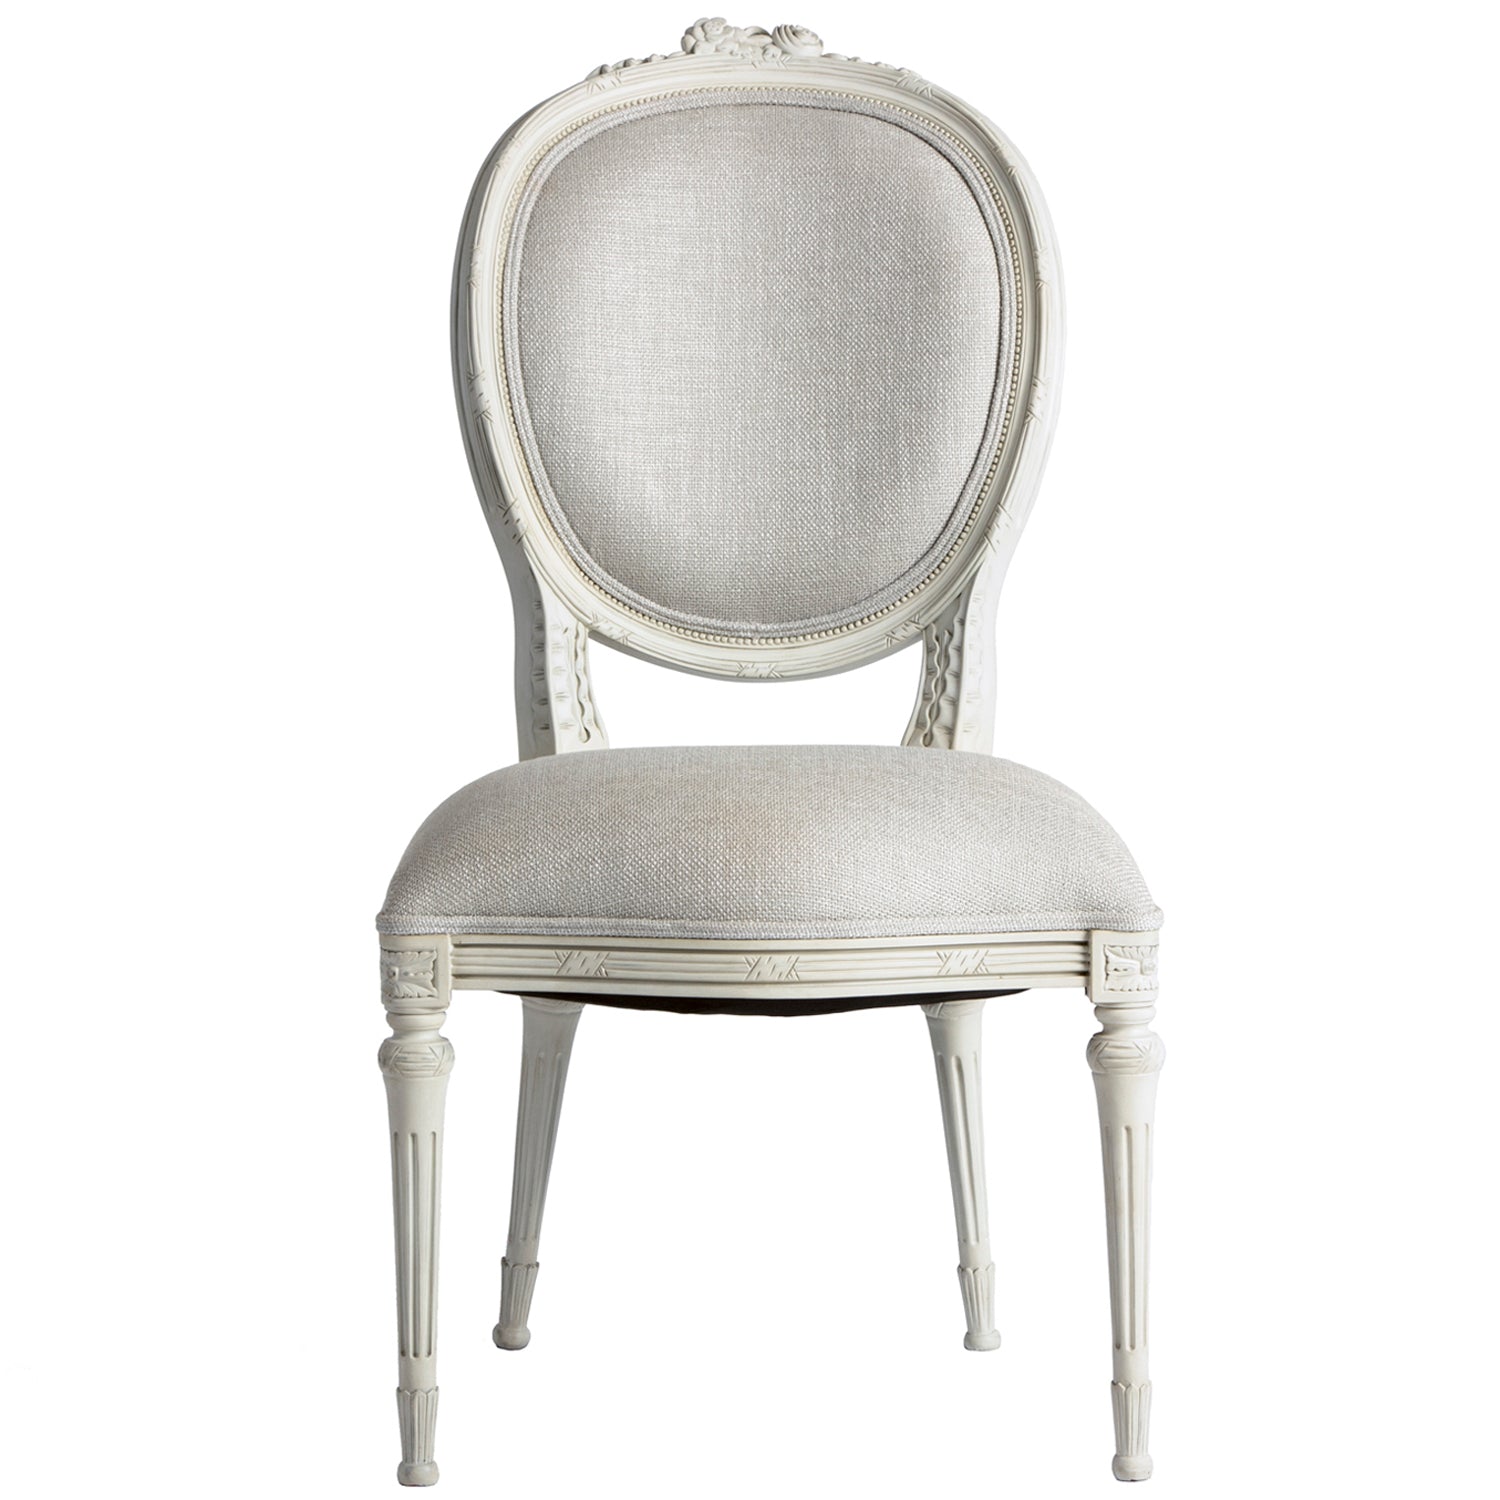 Set of Two - Christine Side Chair